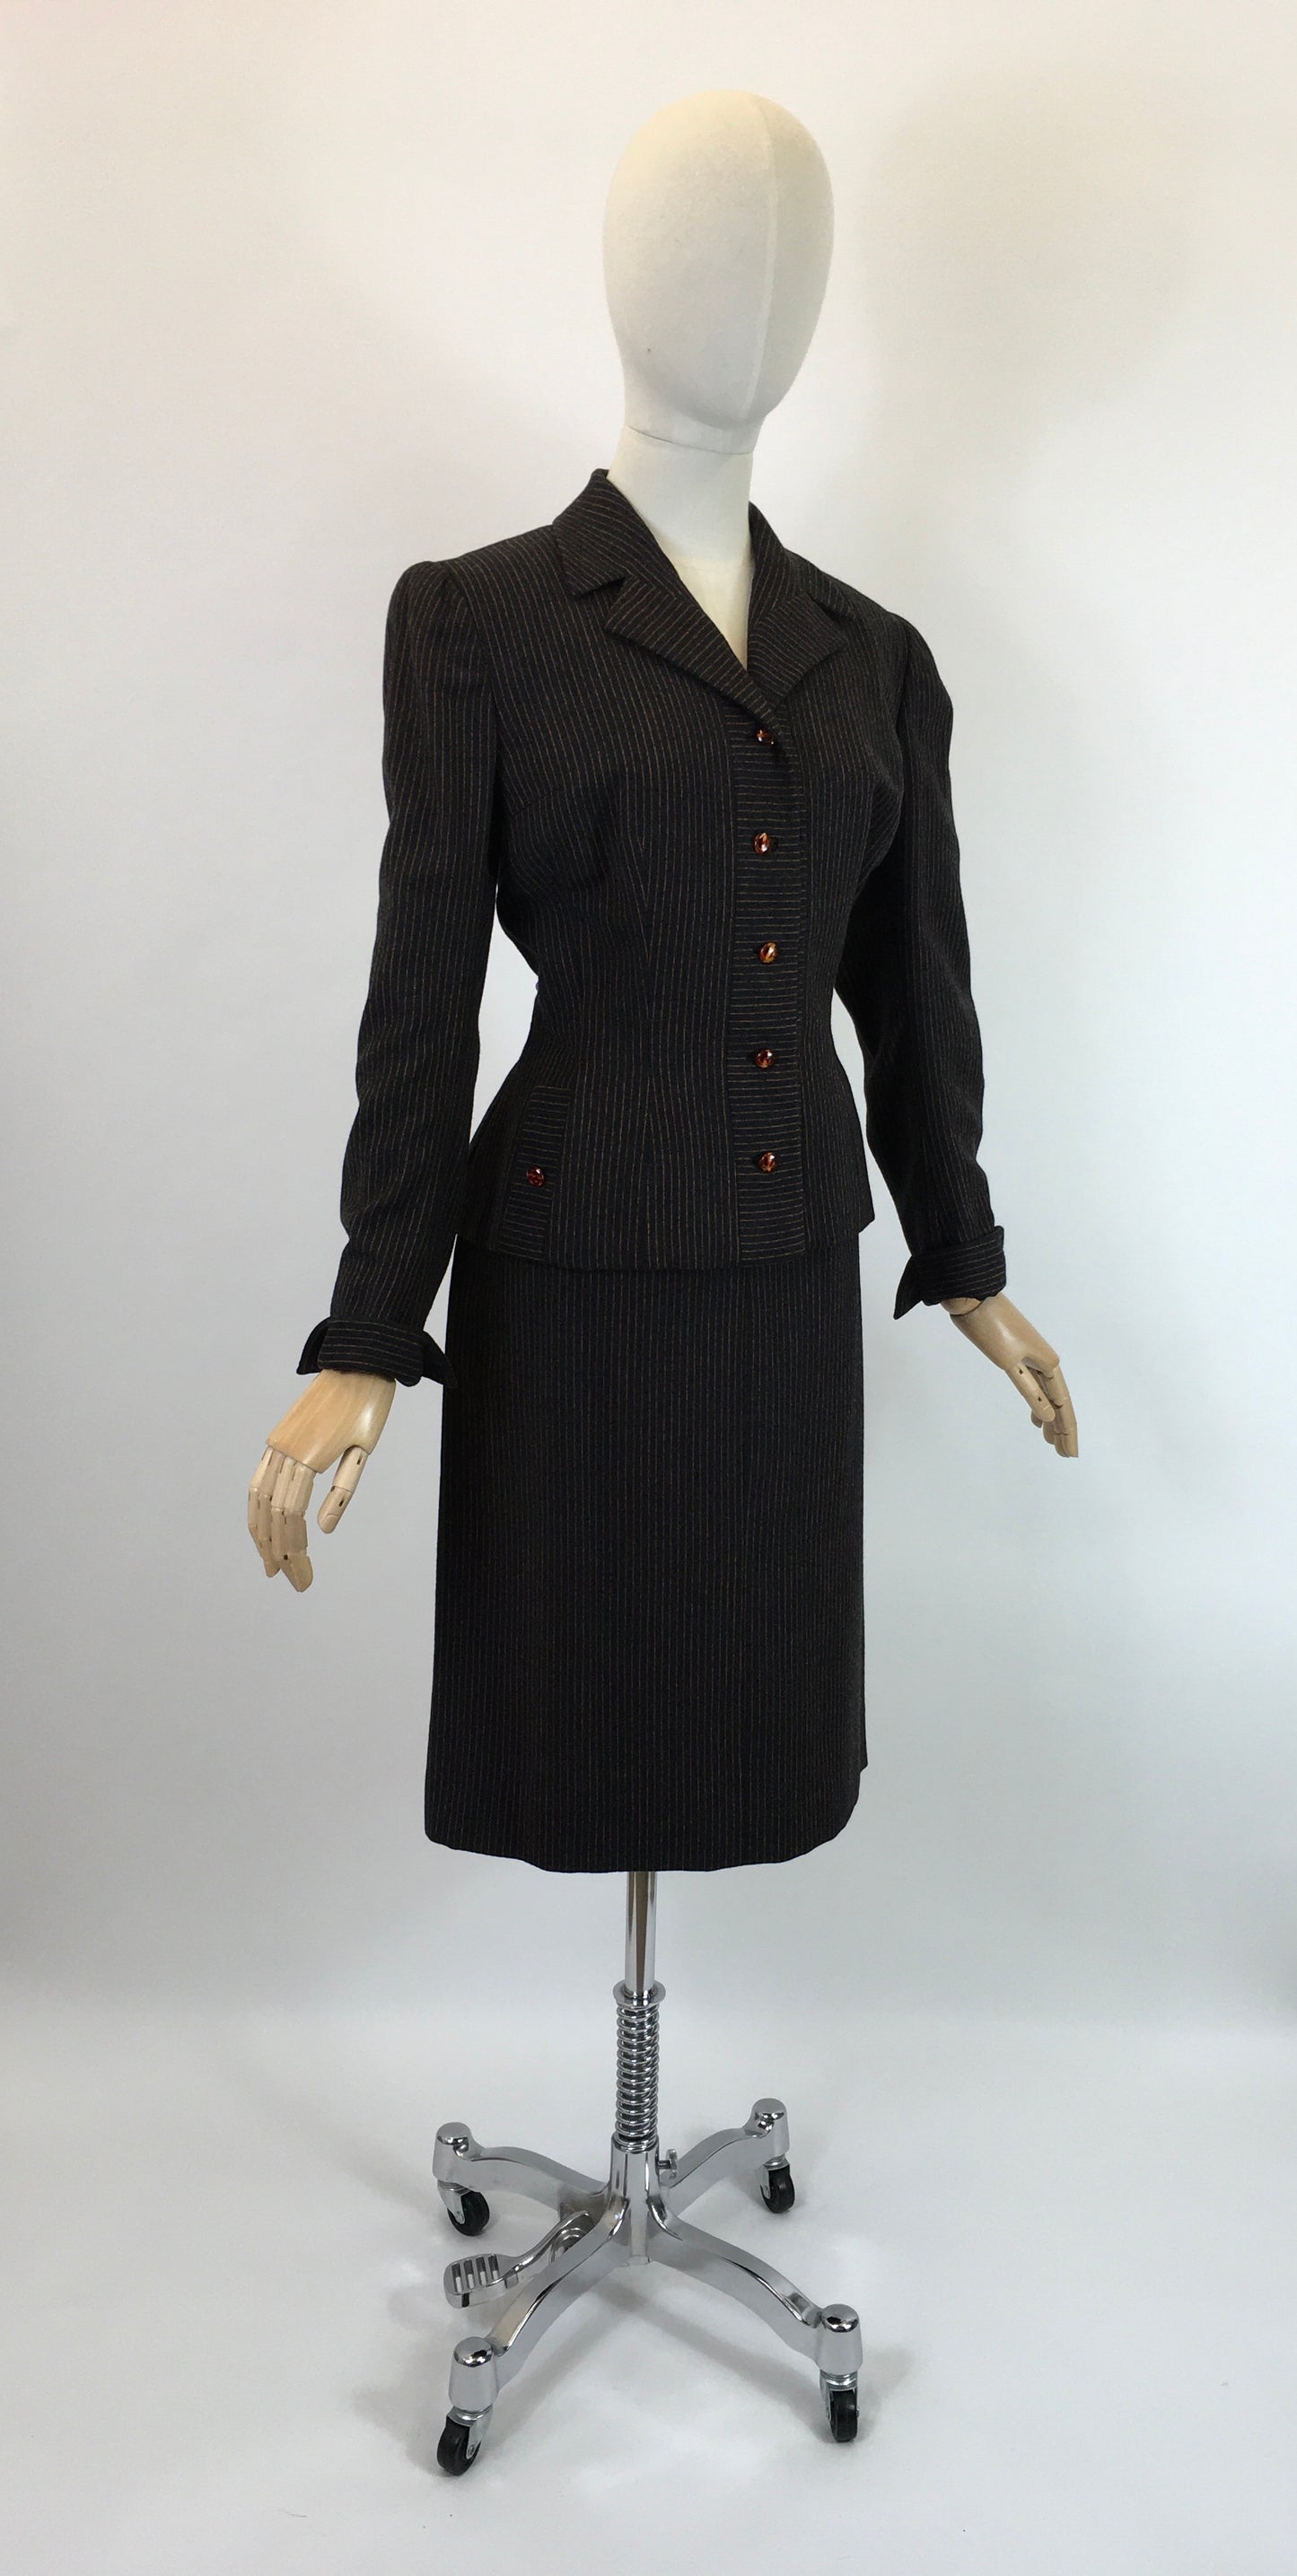 Original 1940’s Sensational American 2pc Suit by ‘ Peck and Peck’ - In Brown and Orange Pinstripe